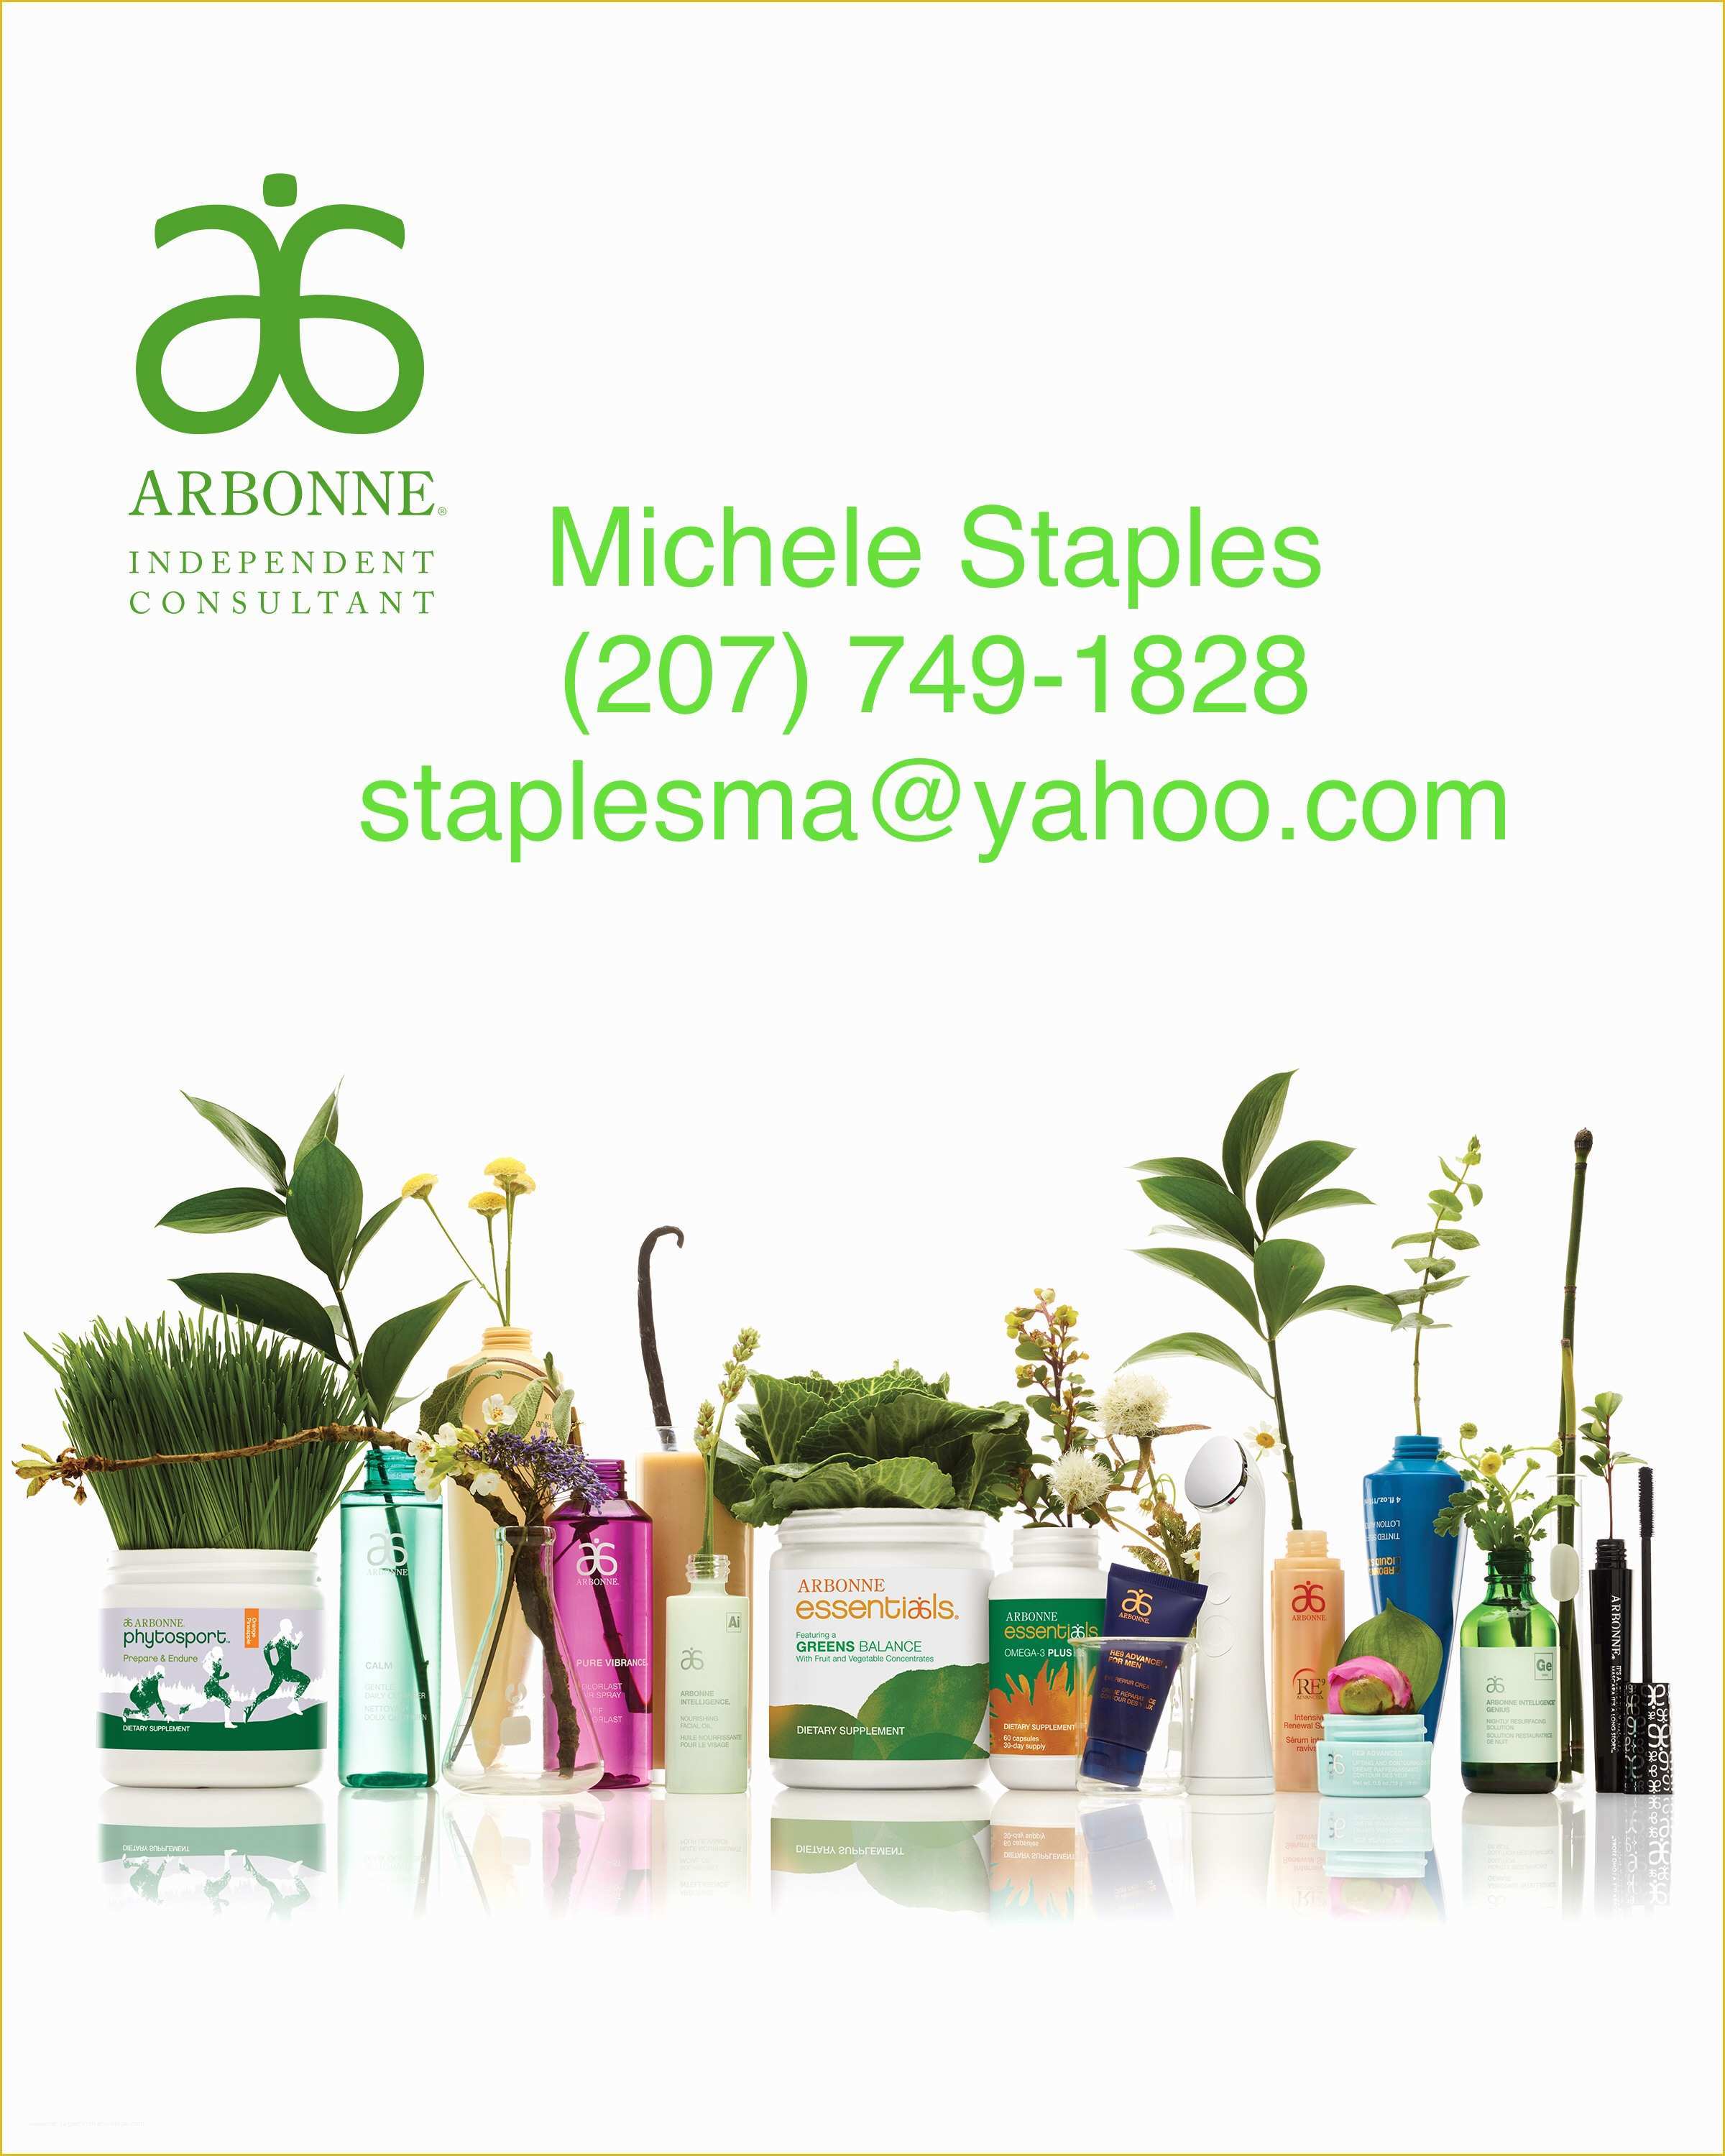 Free Arbonne Flyer Templates Of Arbonne Independent Consultant – Michele Staples